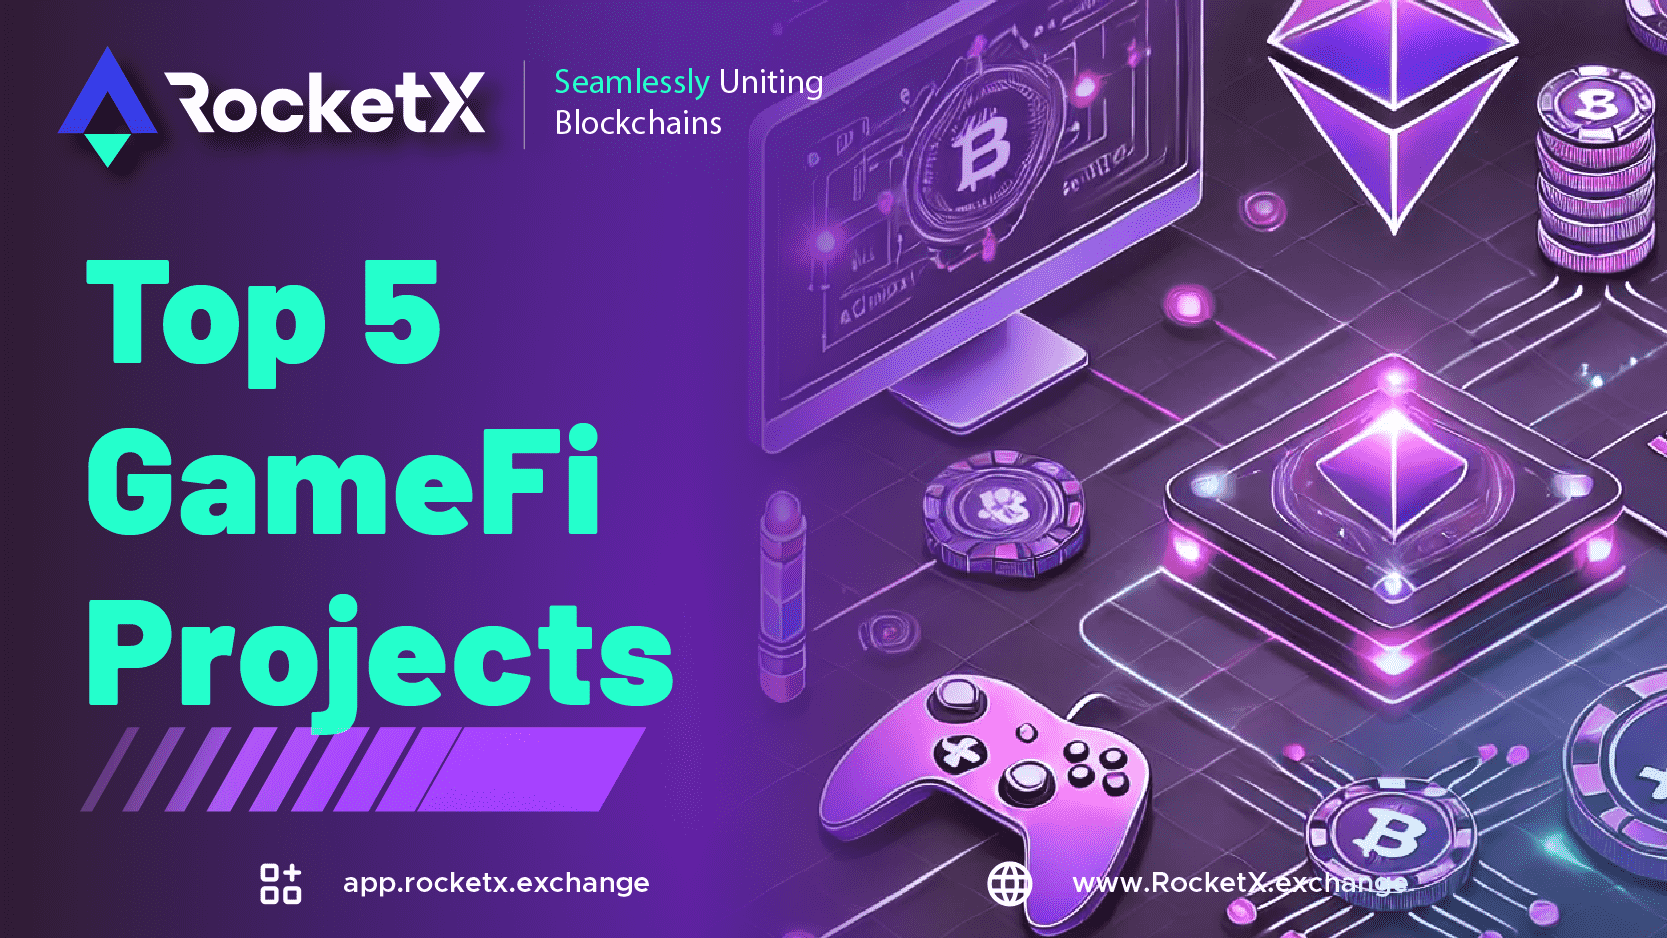 RocketX Top 5 GameFi Projects: Seamlessly Uniting Blockchains - Featuring gaming consoles, cryptocurrency icons, and digital assets